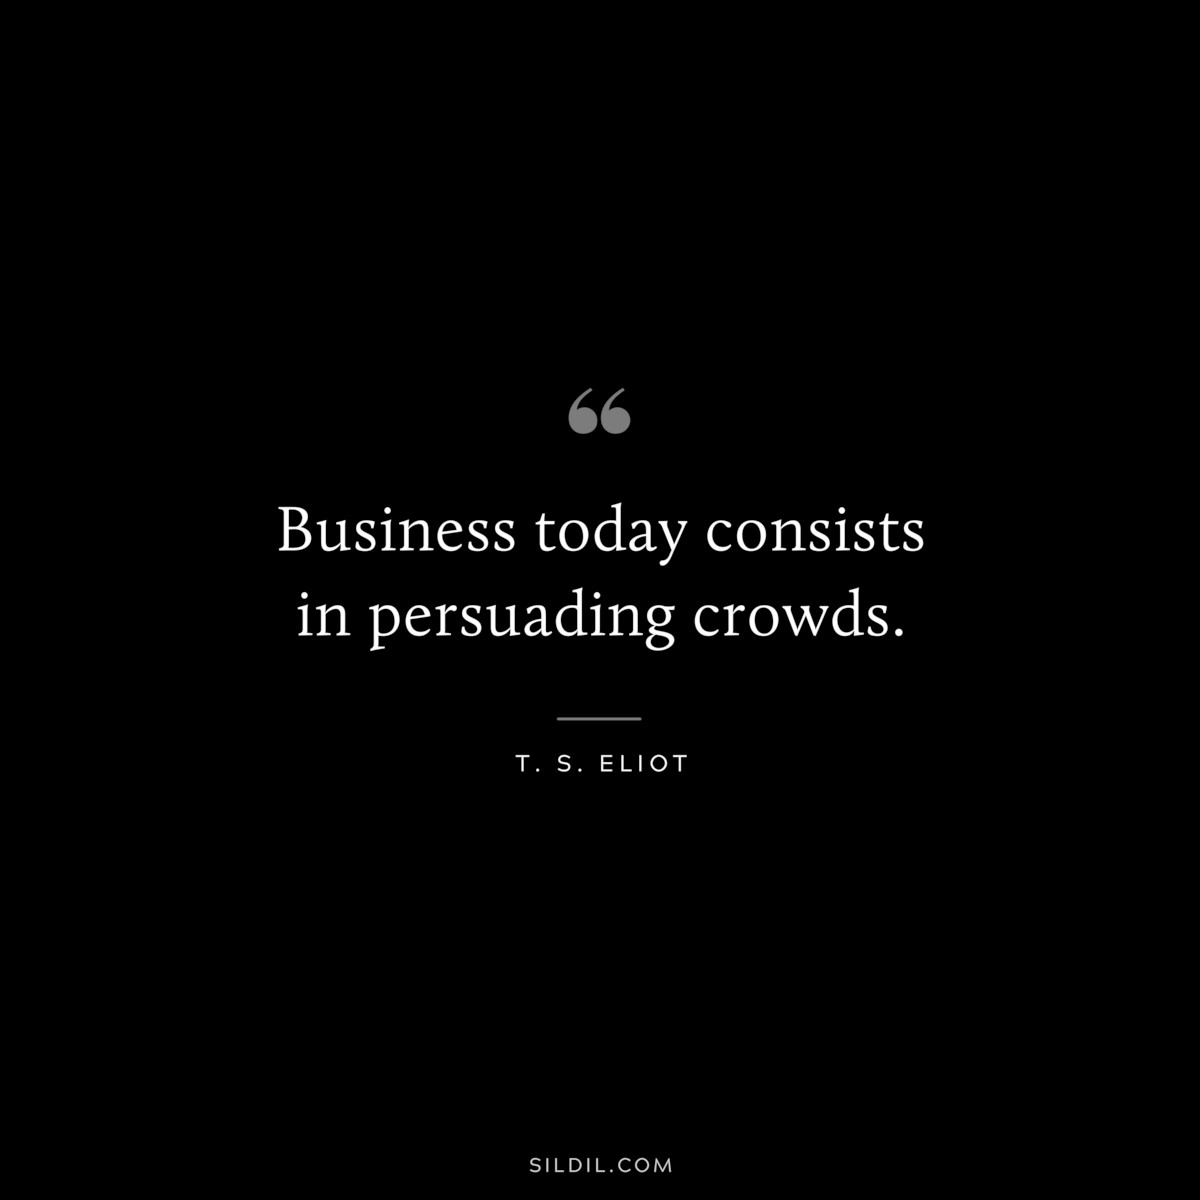 Business today consists in persuading crowds. ― T. S. Eliot